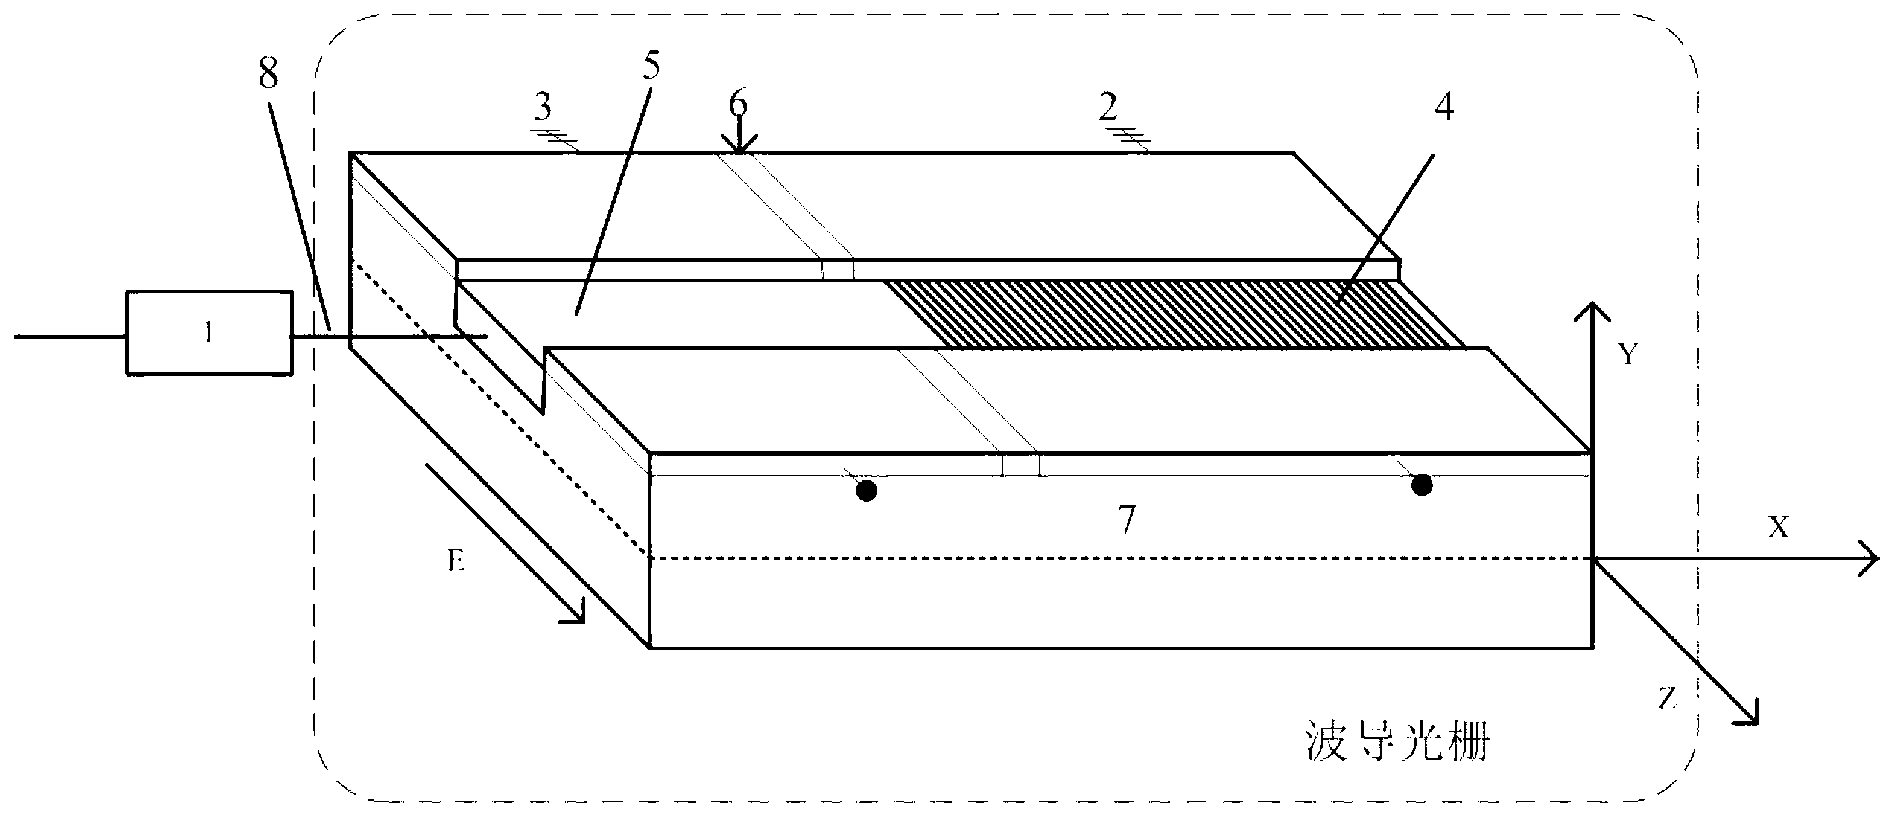 Dynamic tunable filter based on polarization controller and waveguide grating and tuning method